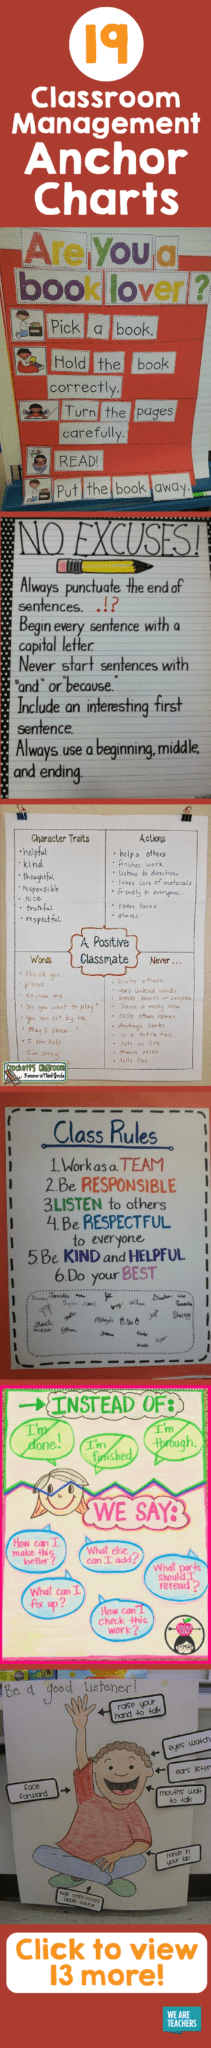 Classroom Norms Chart